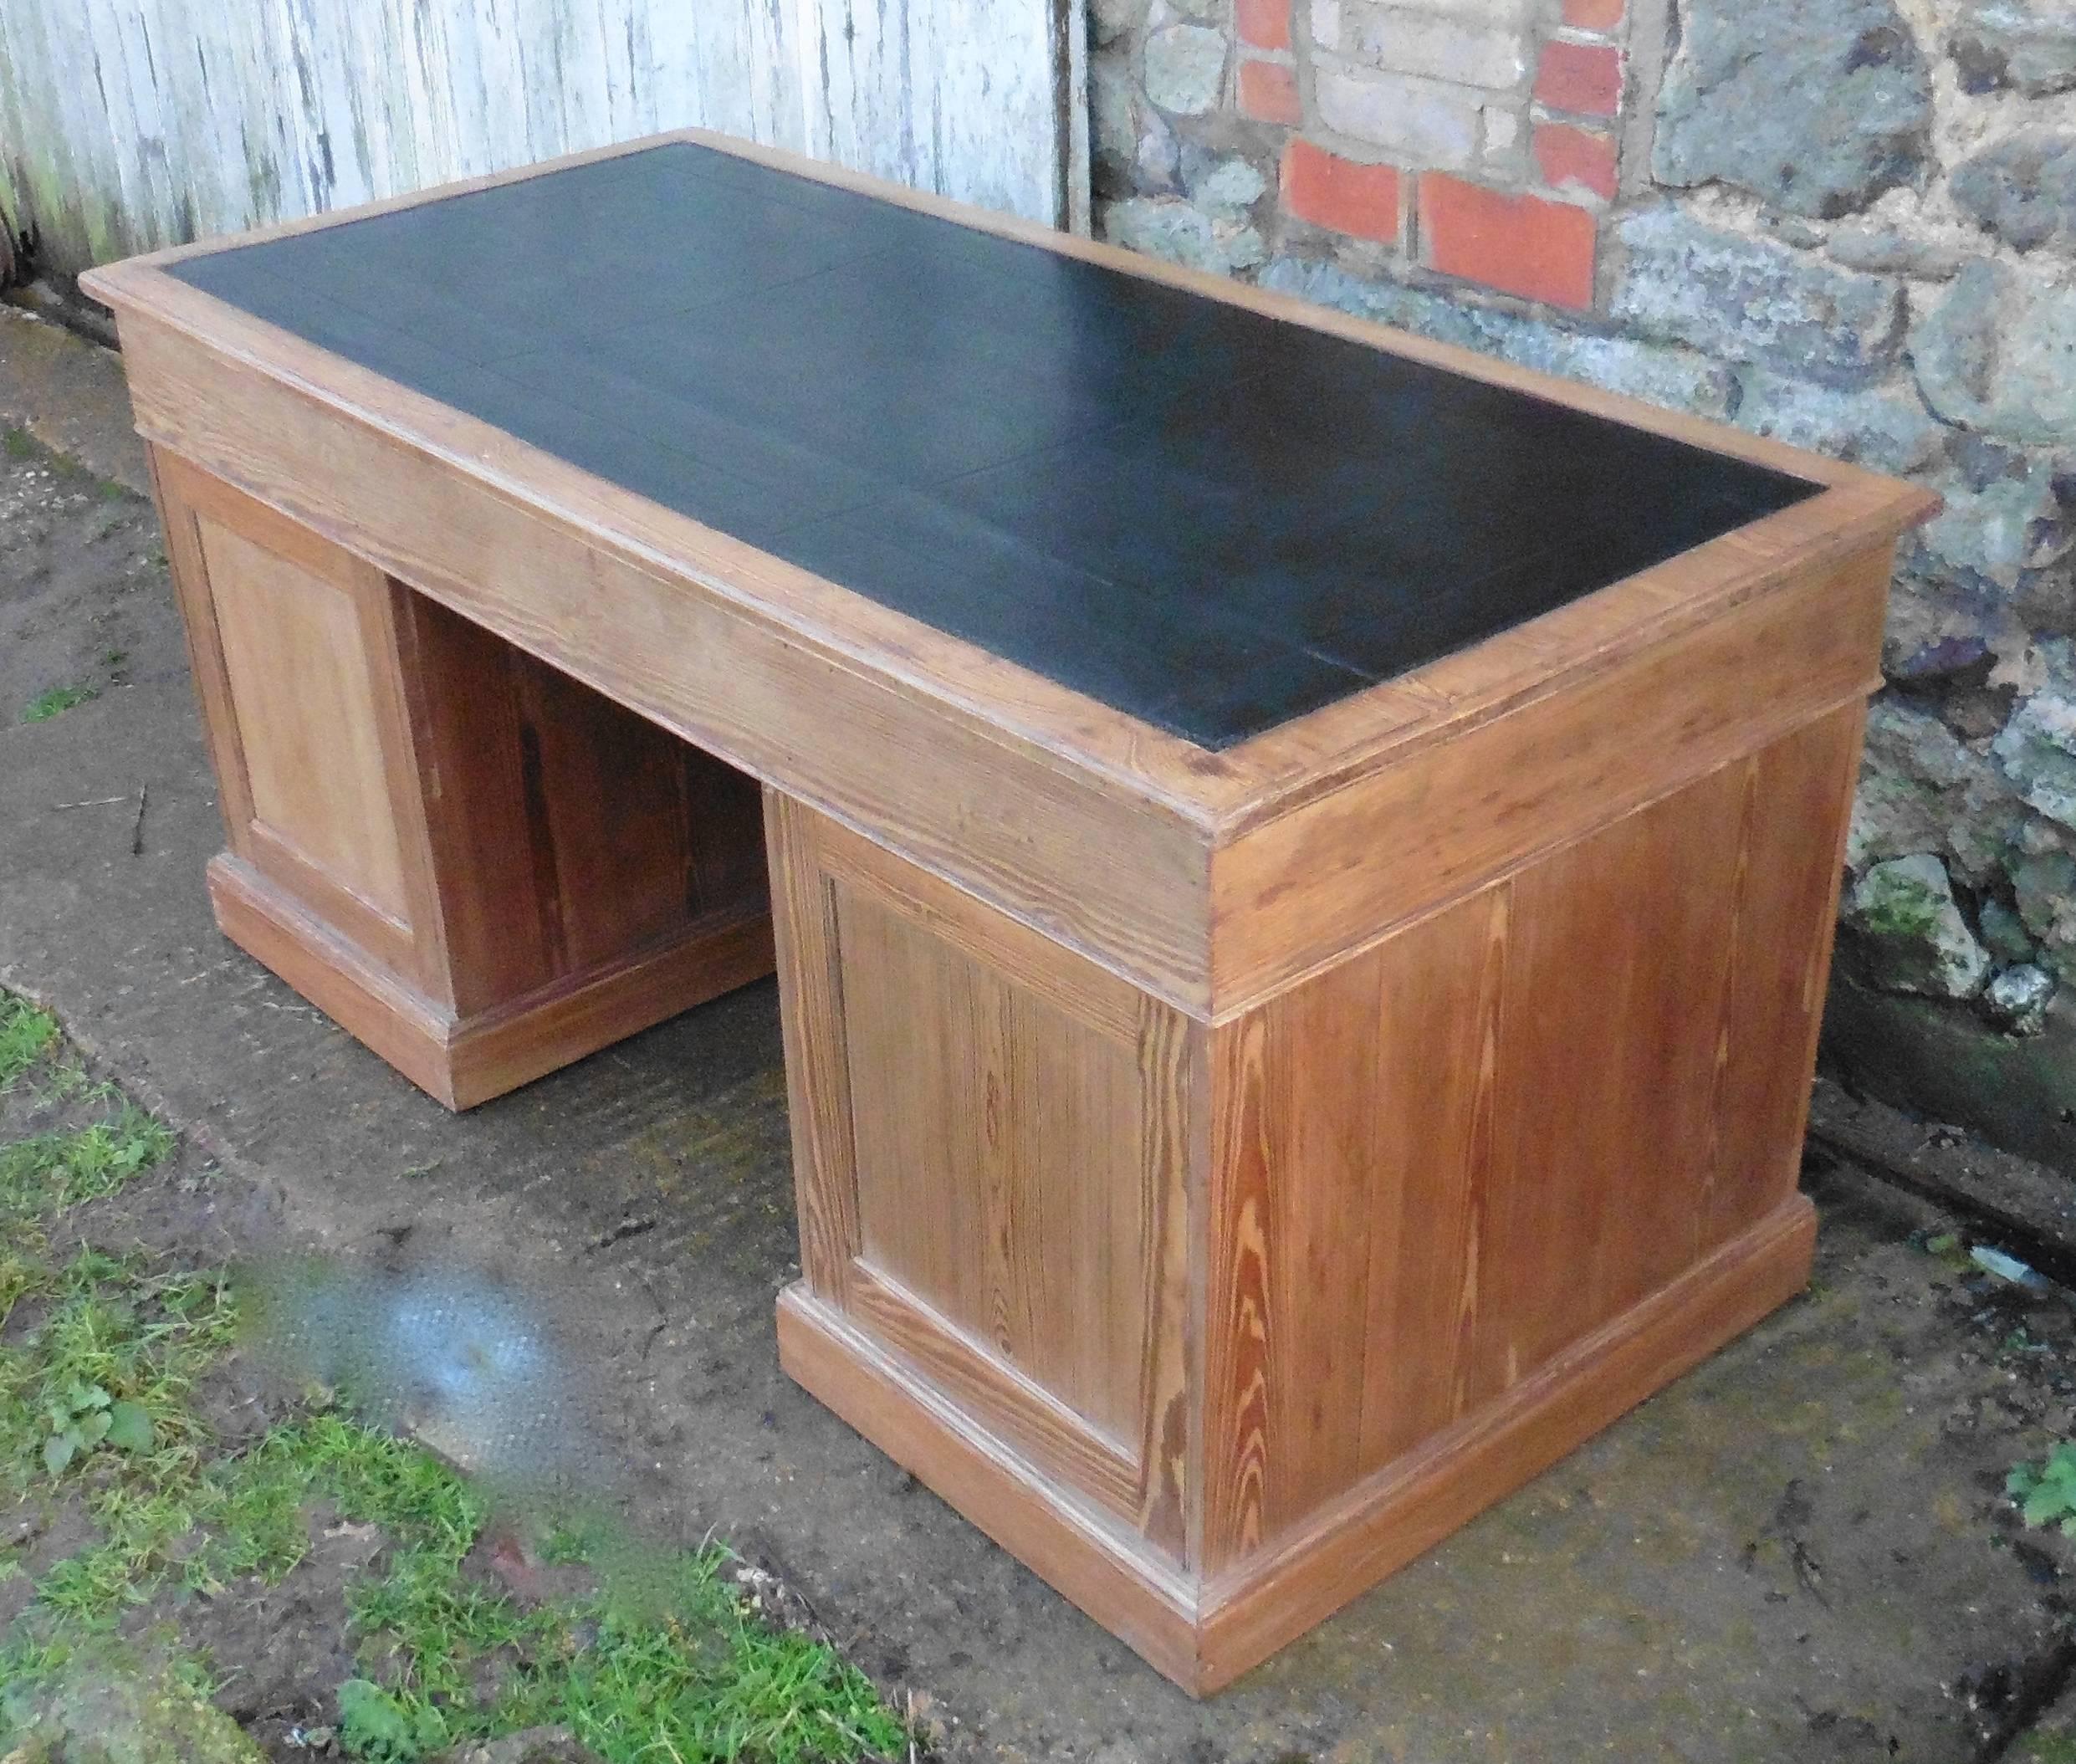 This is a very good quality heals old barristers desk and it is much larger than most desks, the back of the desk is panelled and polished, so it was intended to be seen from all sides even though it is not a partners’ desk
The desk has been fully